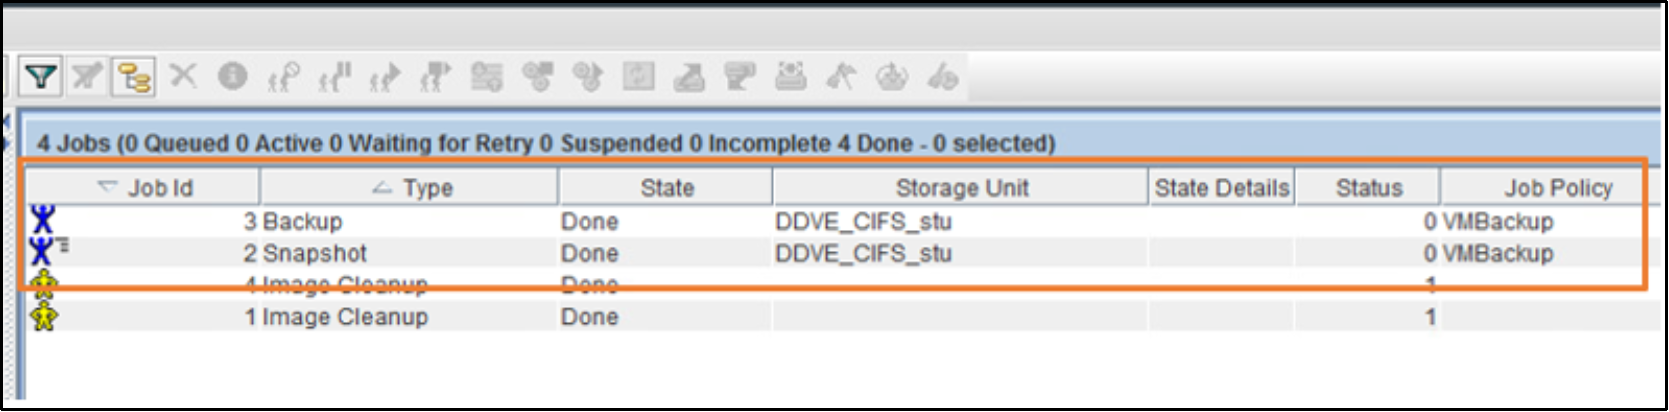 This image shows successful backup using the CIFS storage unit created